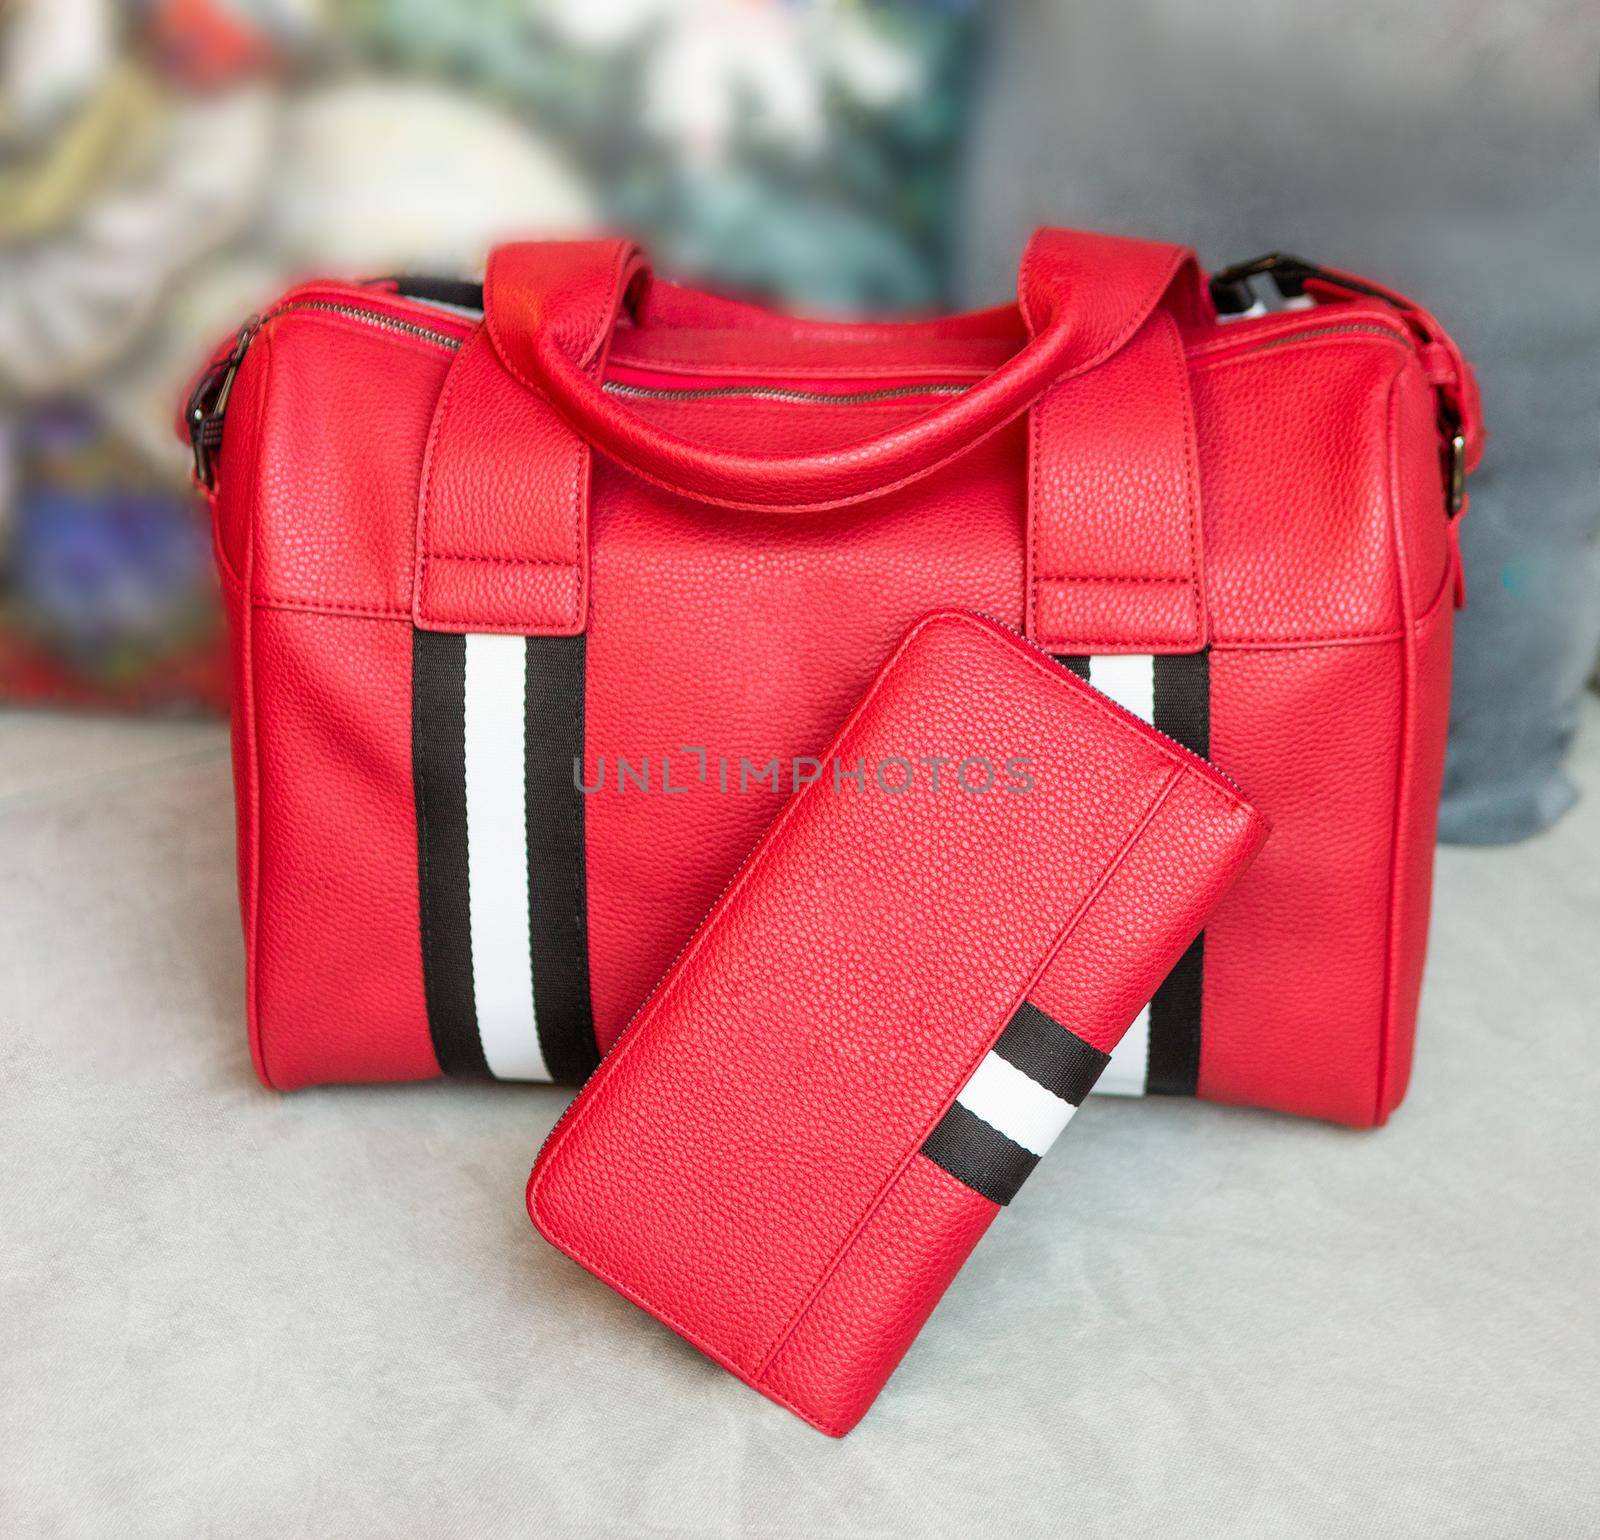 Red man handbag and wallet isolated